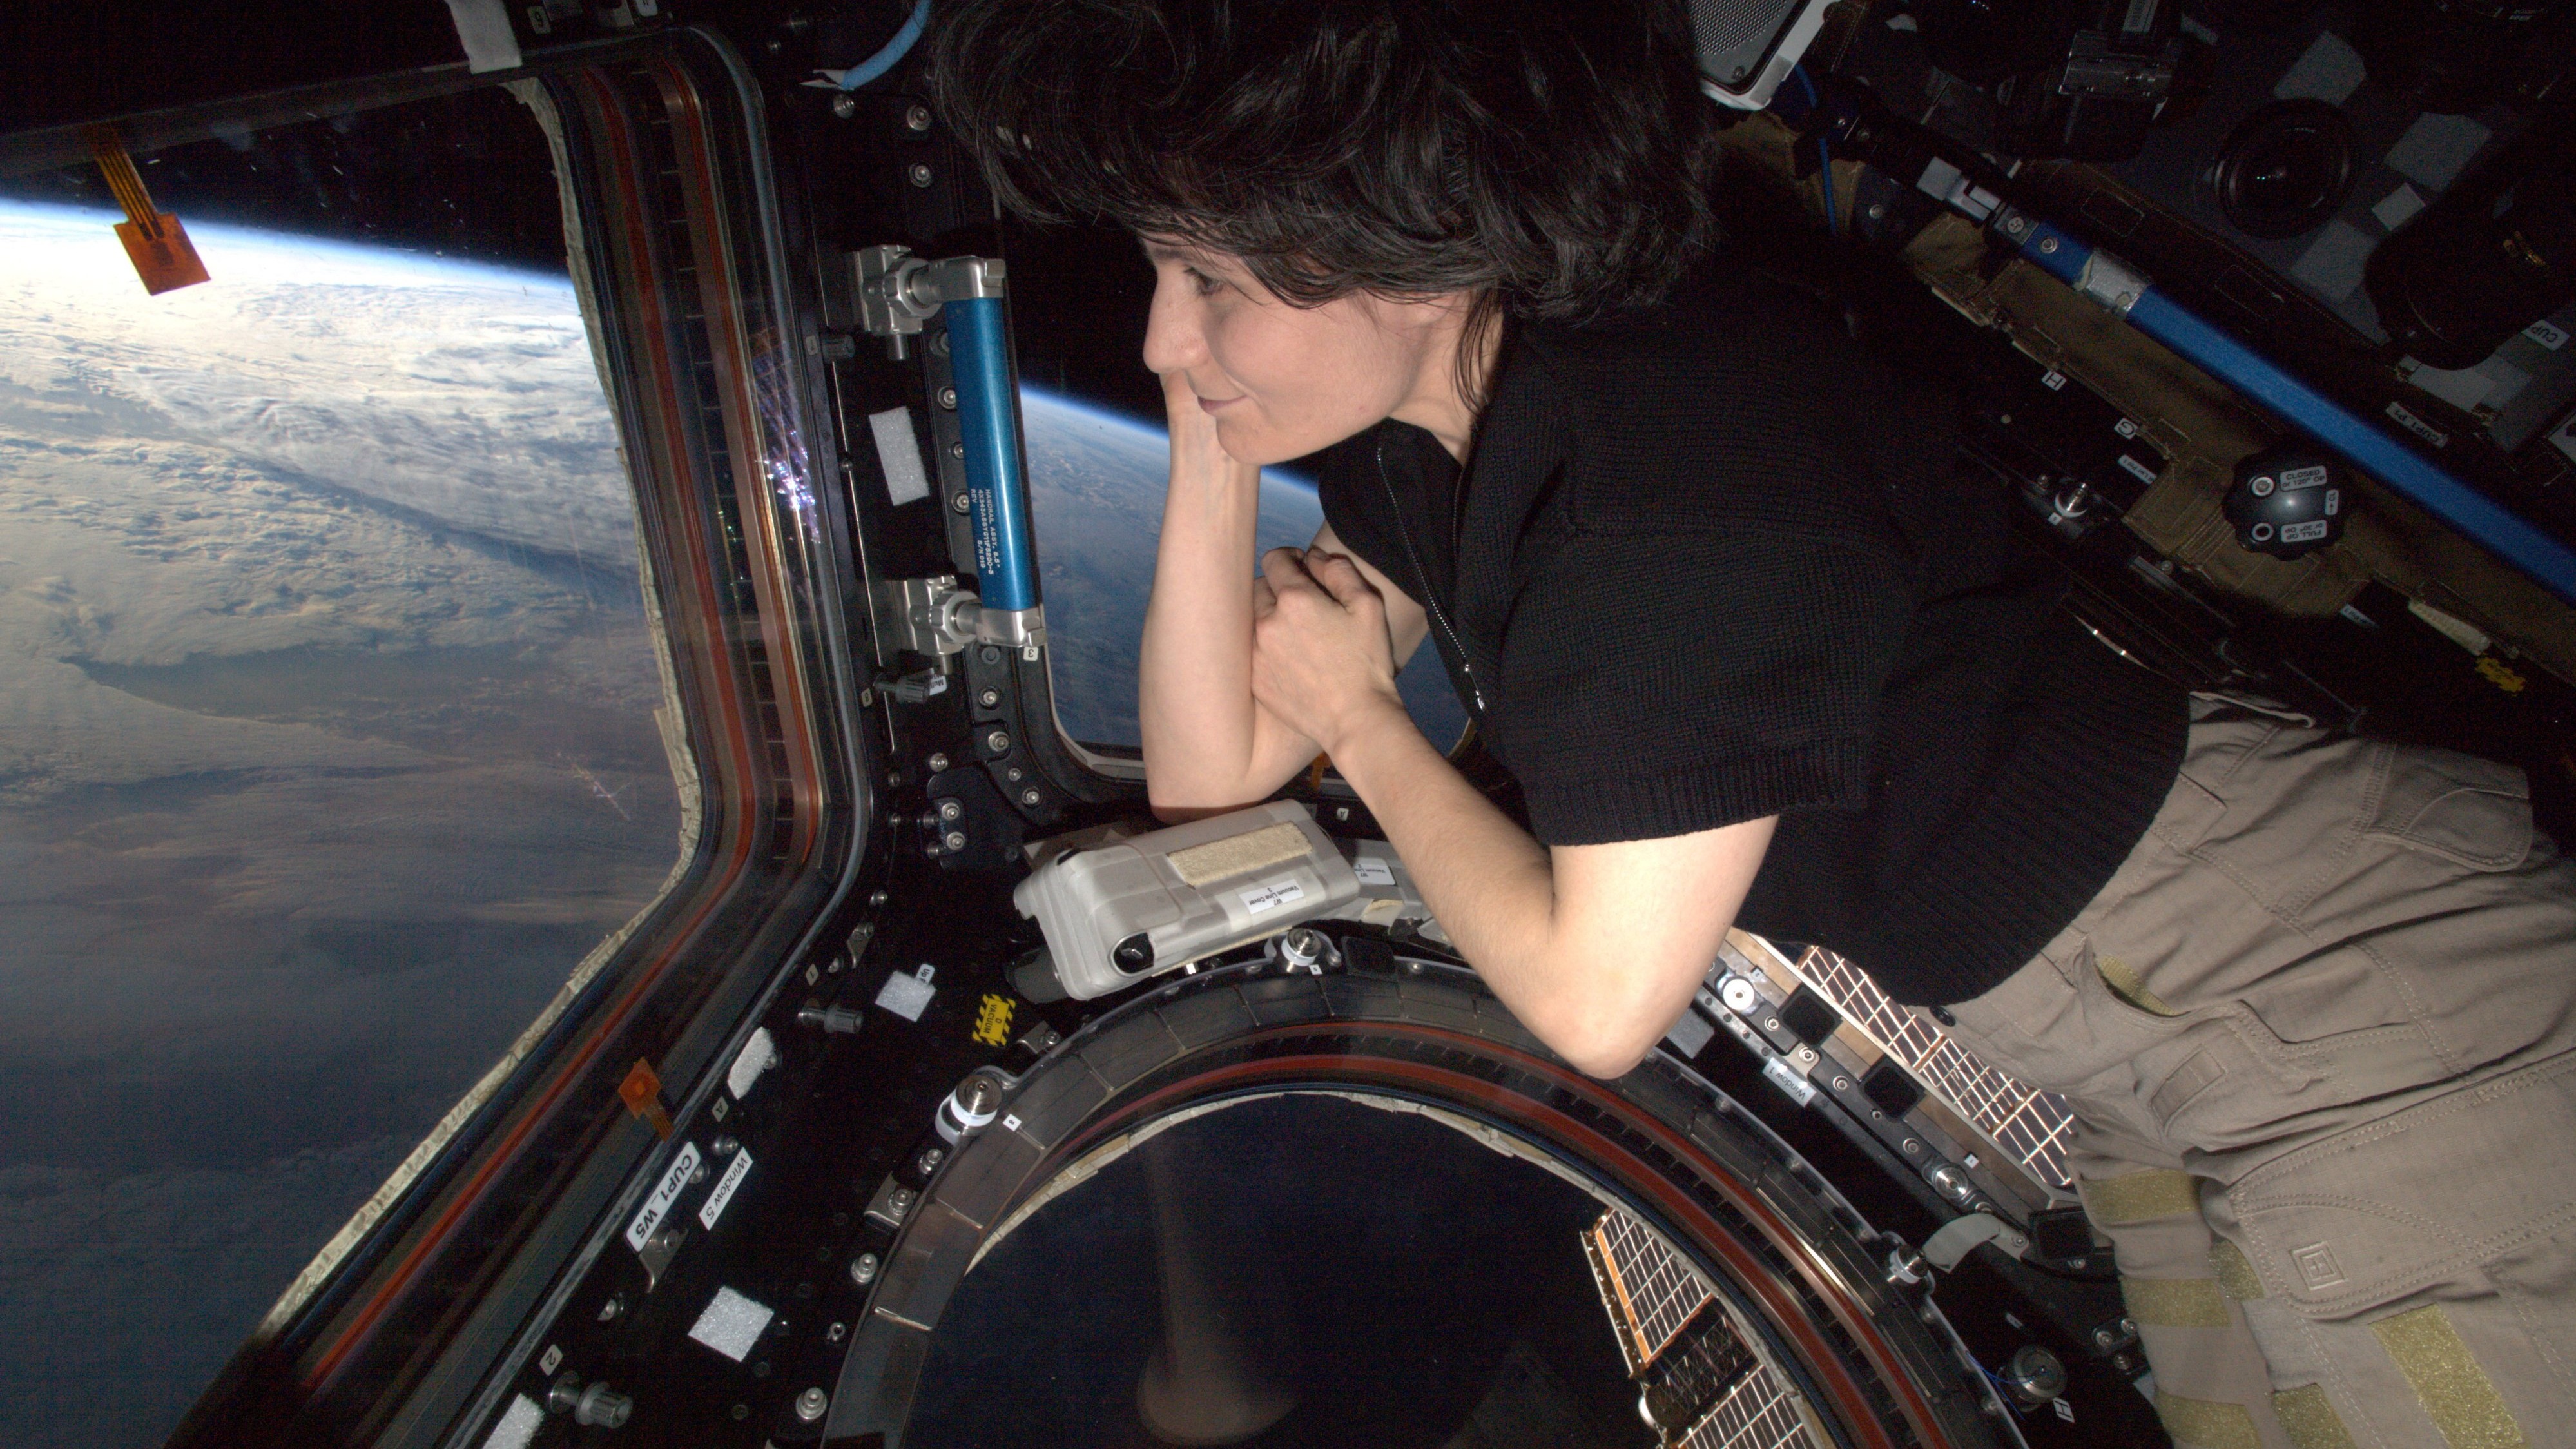 samantha cristoforetti leaning on cupola and looking outside with a view of earth below